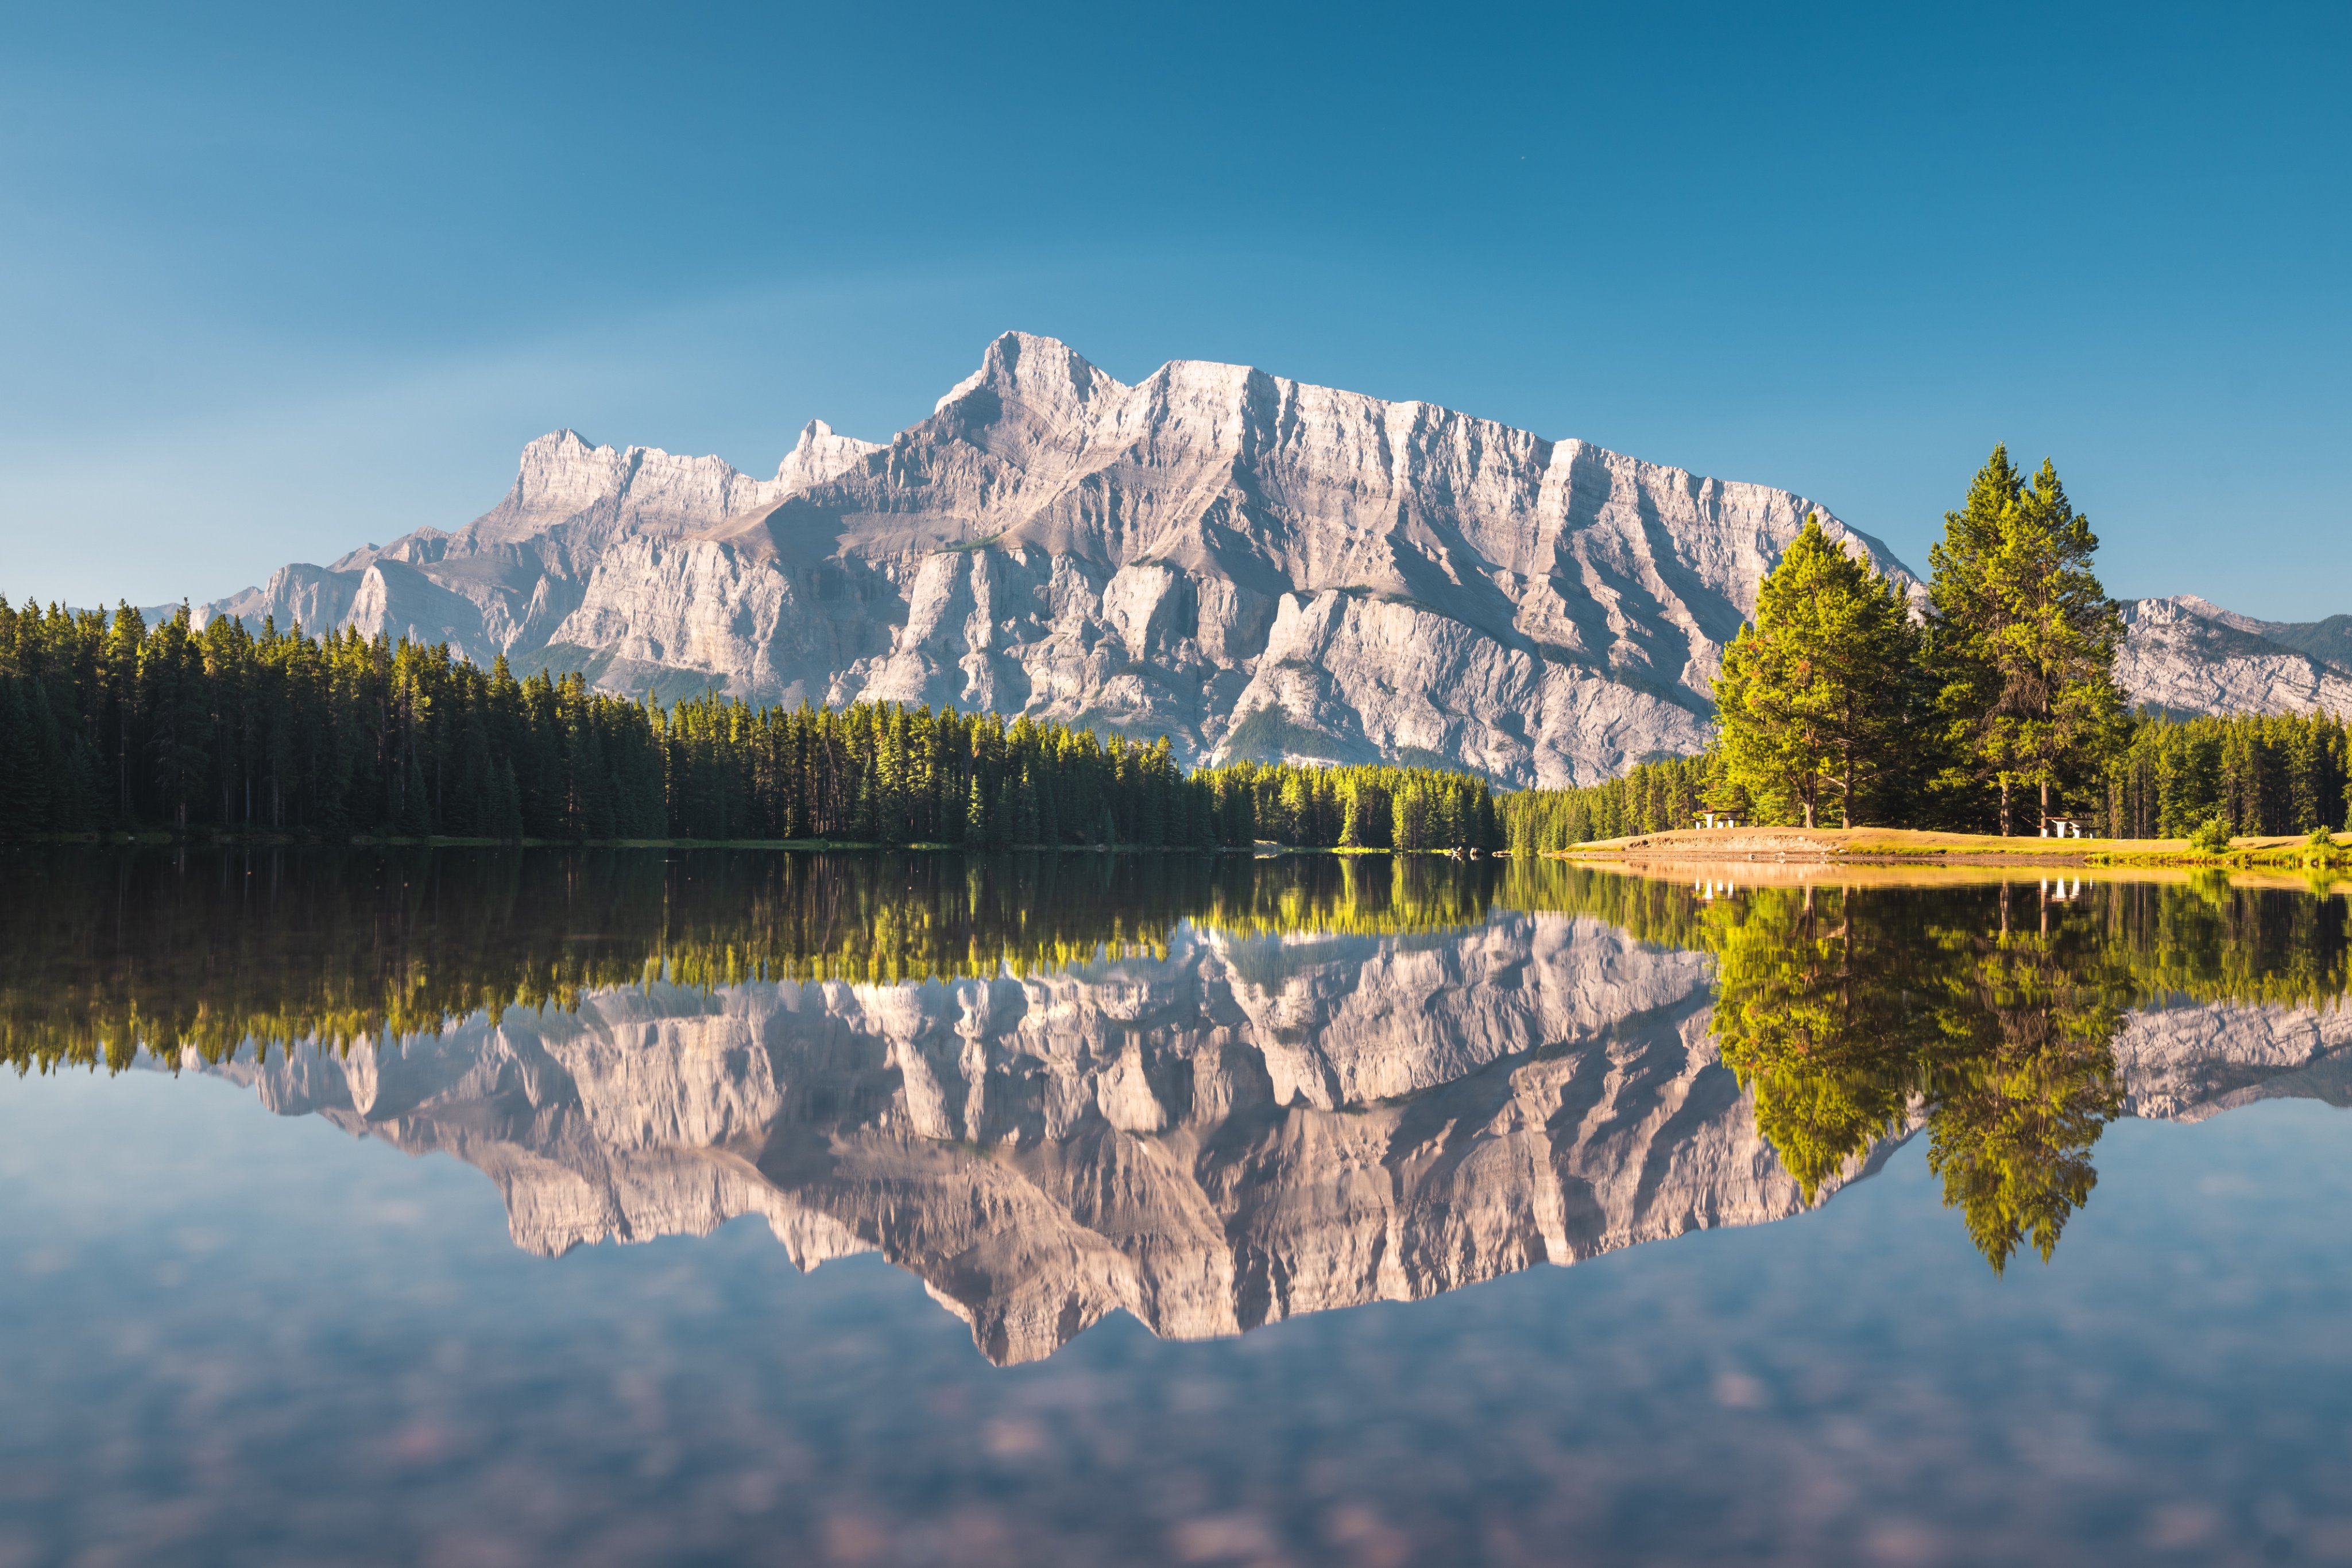 General 4096x2731 landscape nature mountains lake reflection pine trees forest Mount Rundle Two Jack Lake Canada Banff National Park